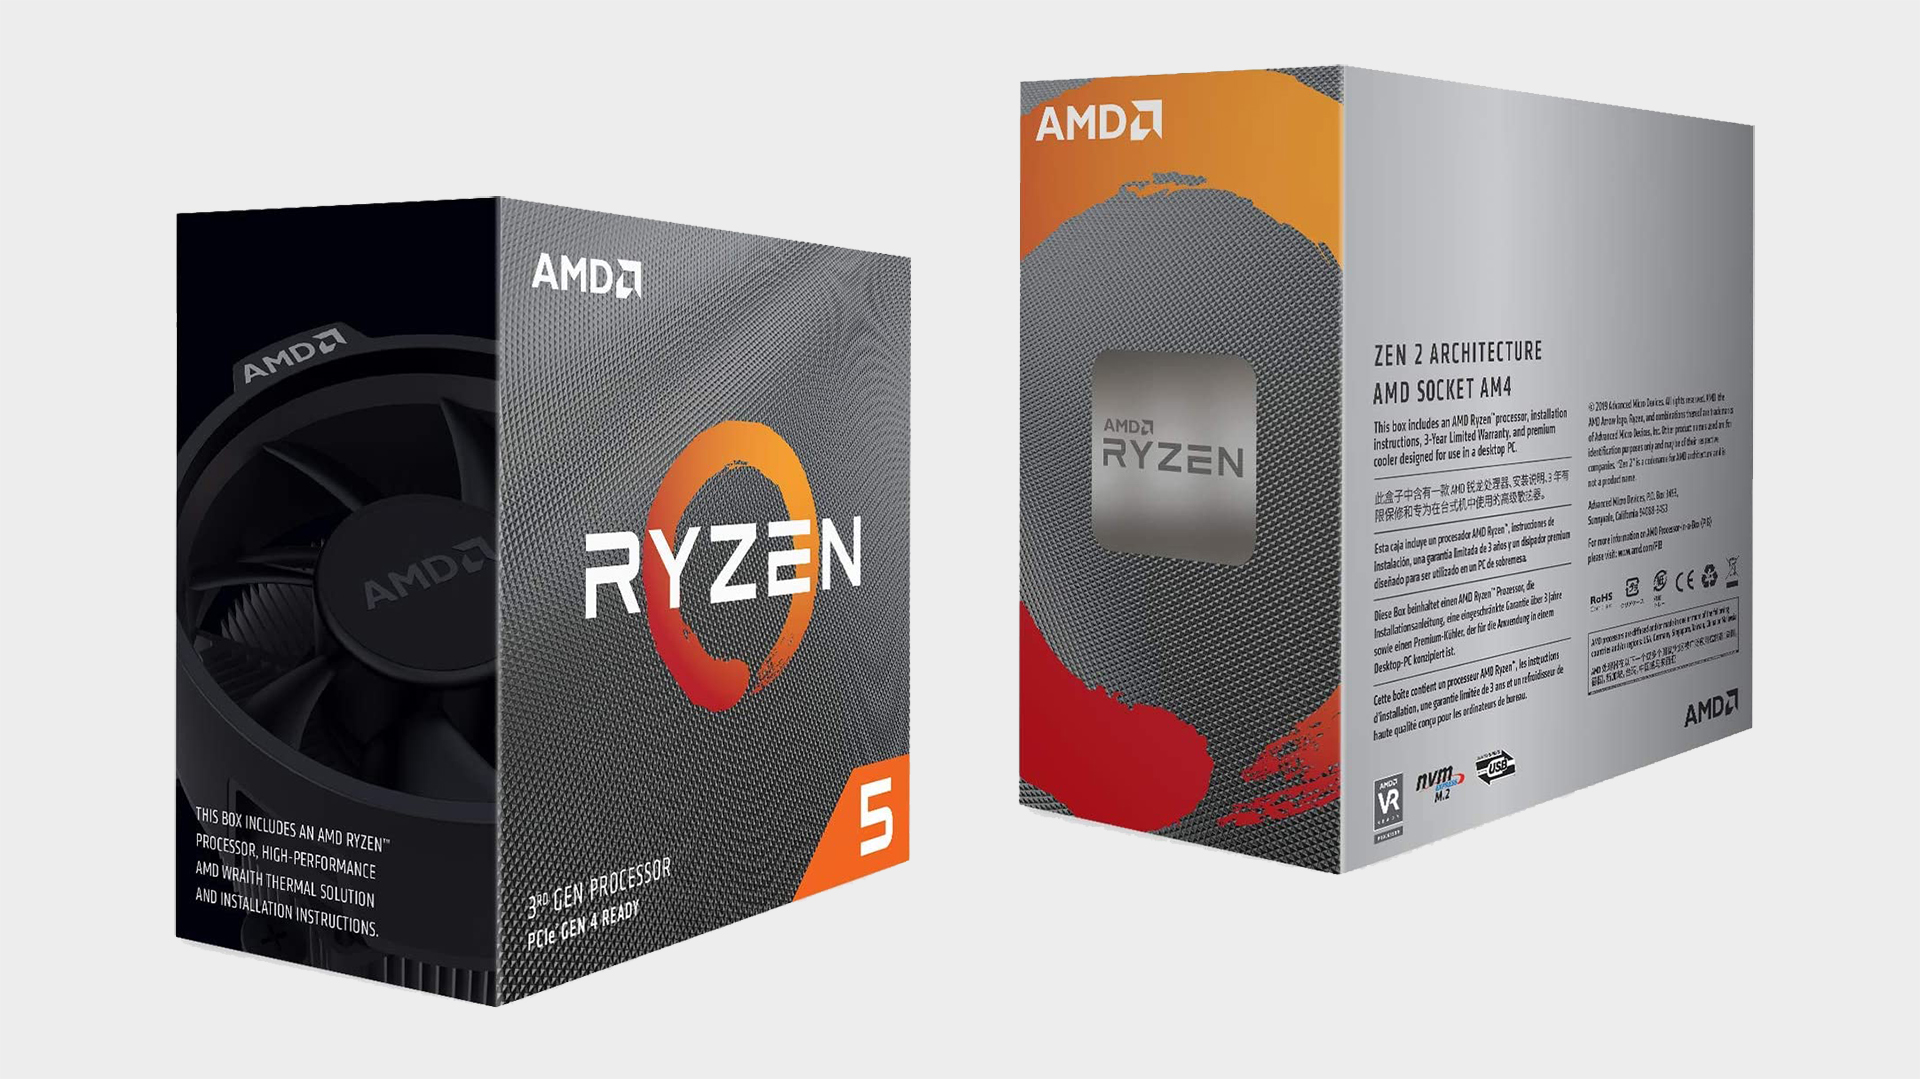 AMD Ryzen 5 3600 review: A great value gaming CPU